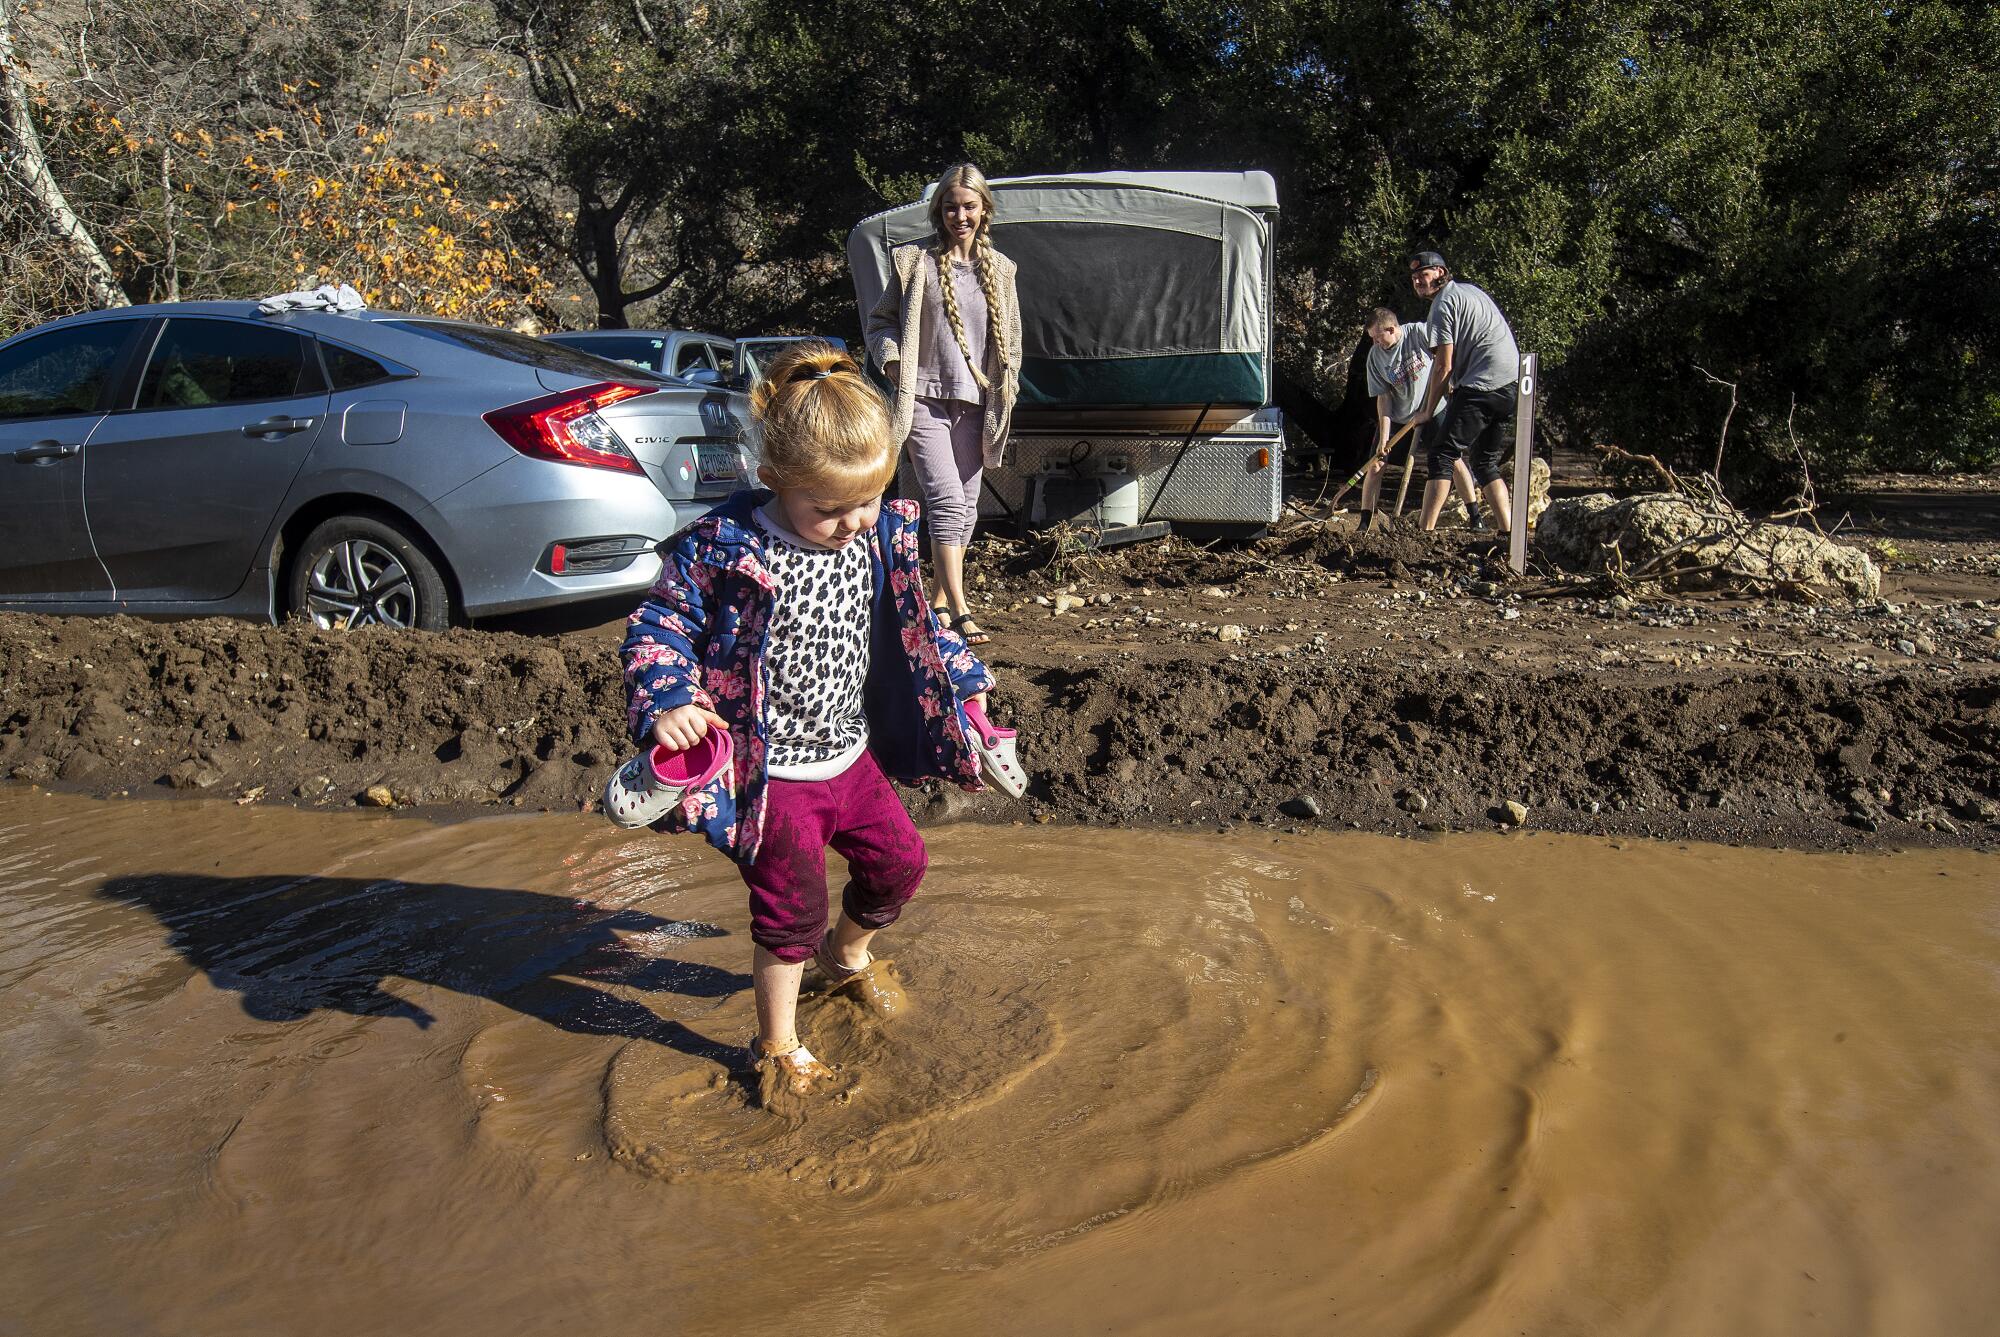 Nevaeh Allphin, 3, plays in a river of water from the recent rainstorm at Leo Carrillo State Campground in Malibu